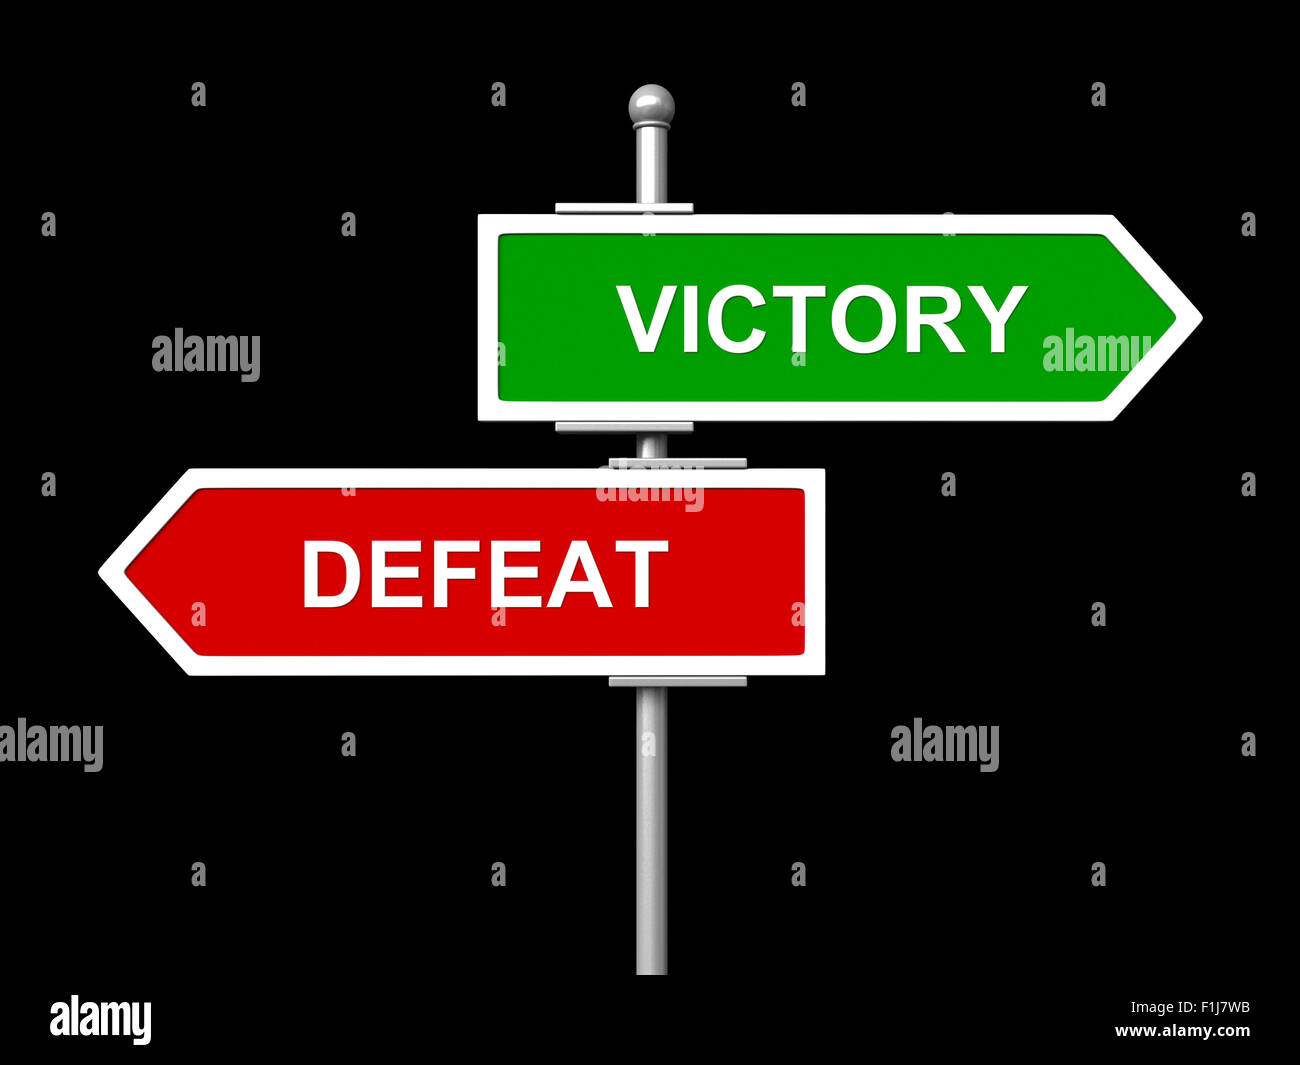 3d render of victory and defeat road signs on black background Stock Photo